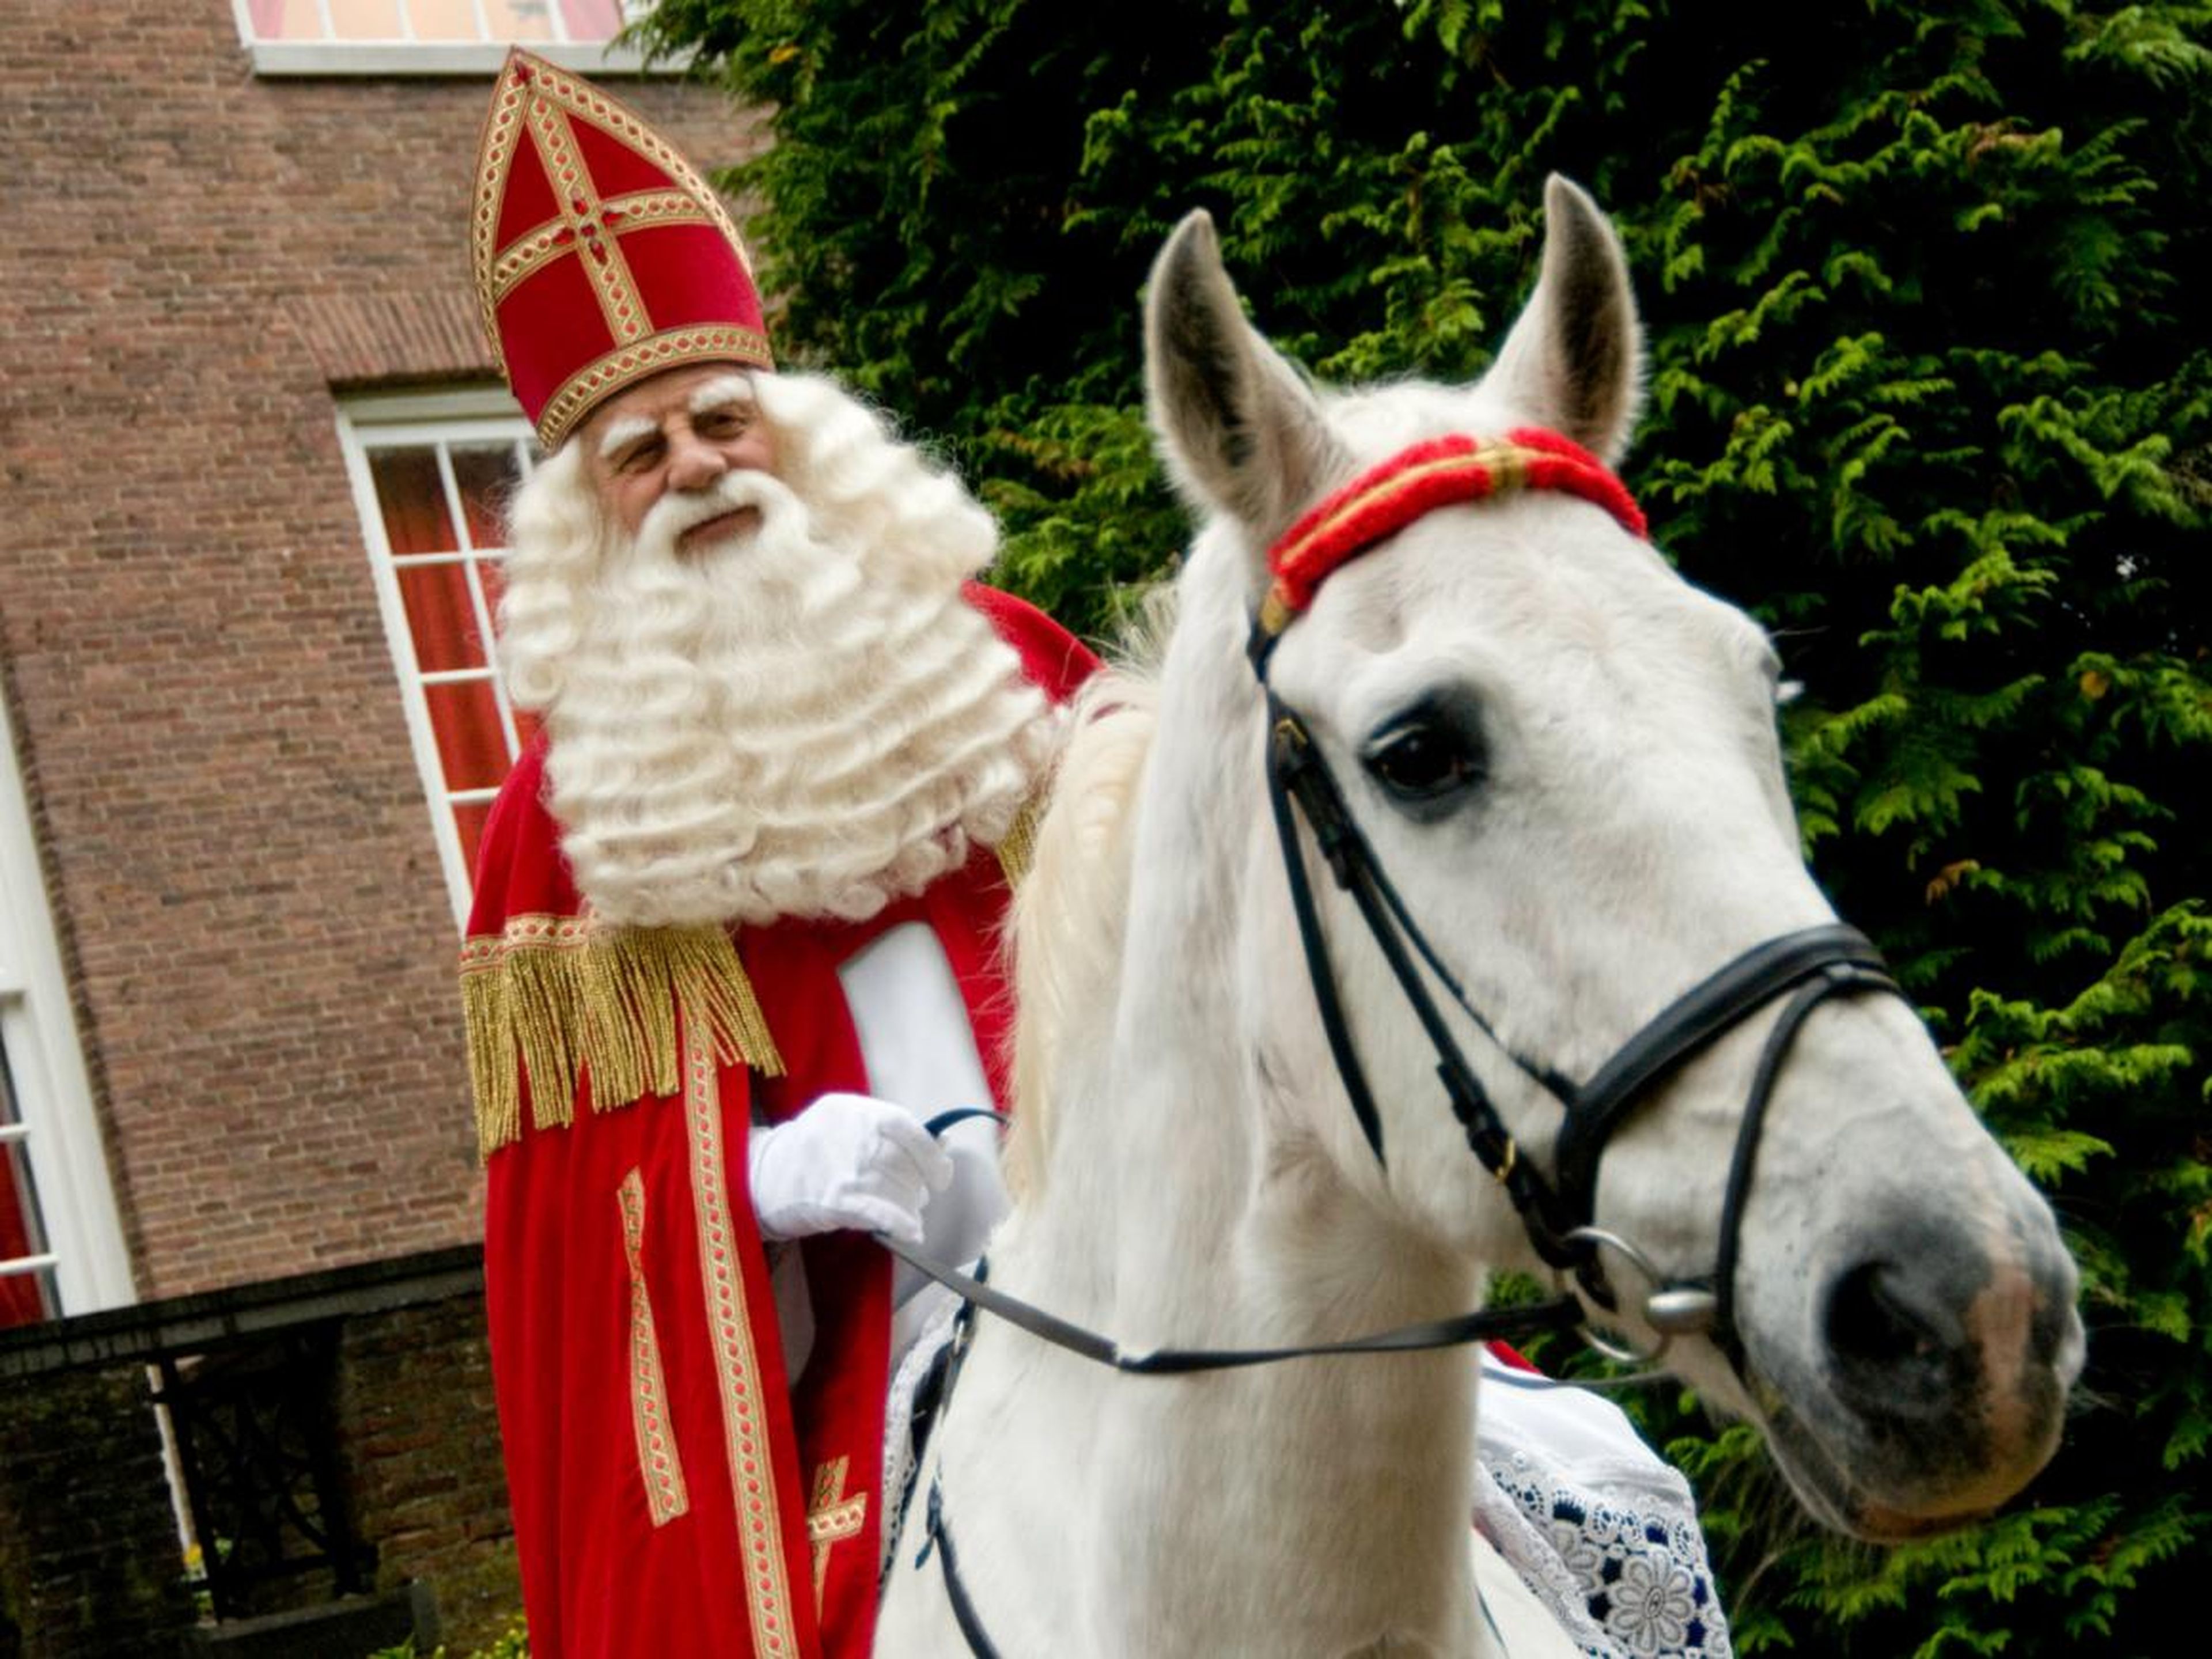 Sinterklaas rides on his horse outside the Het Loo Palace in the Netherlands.